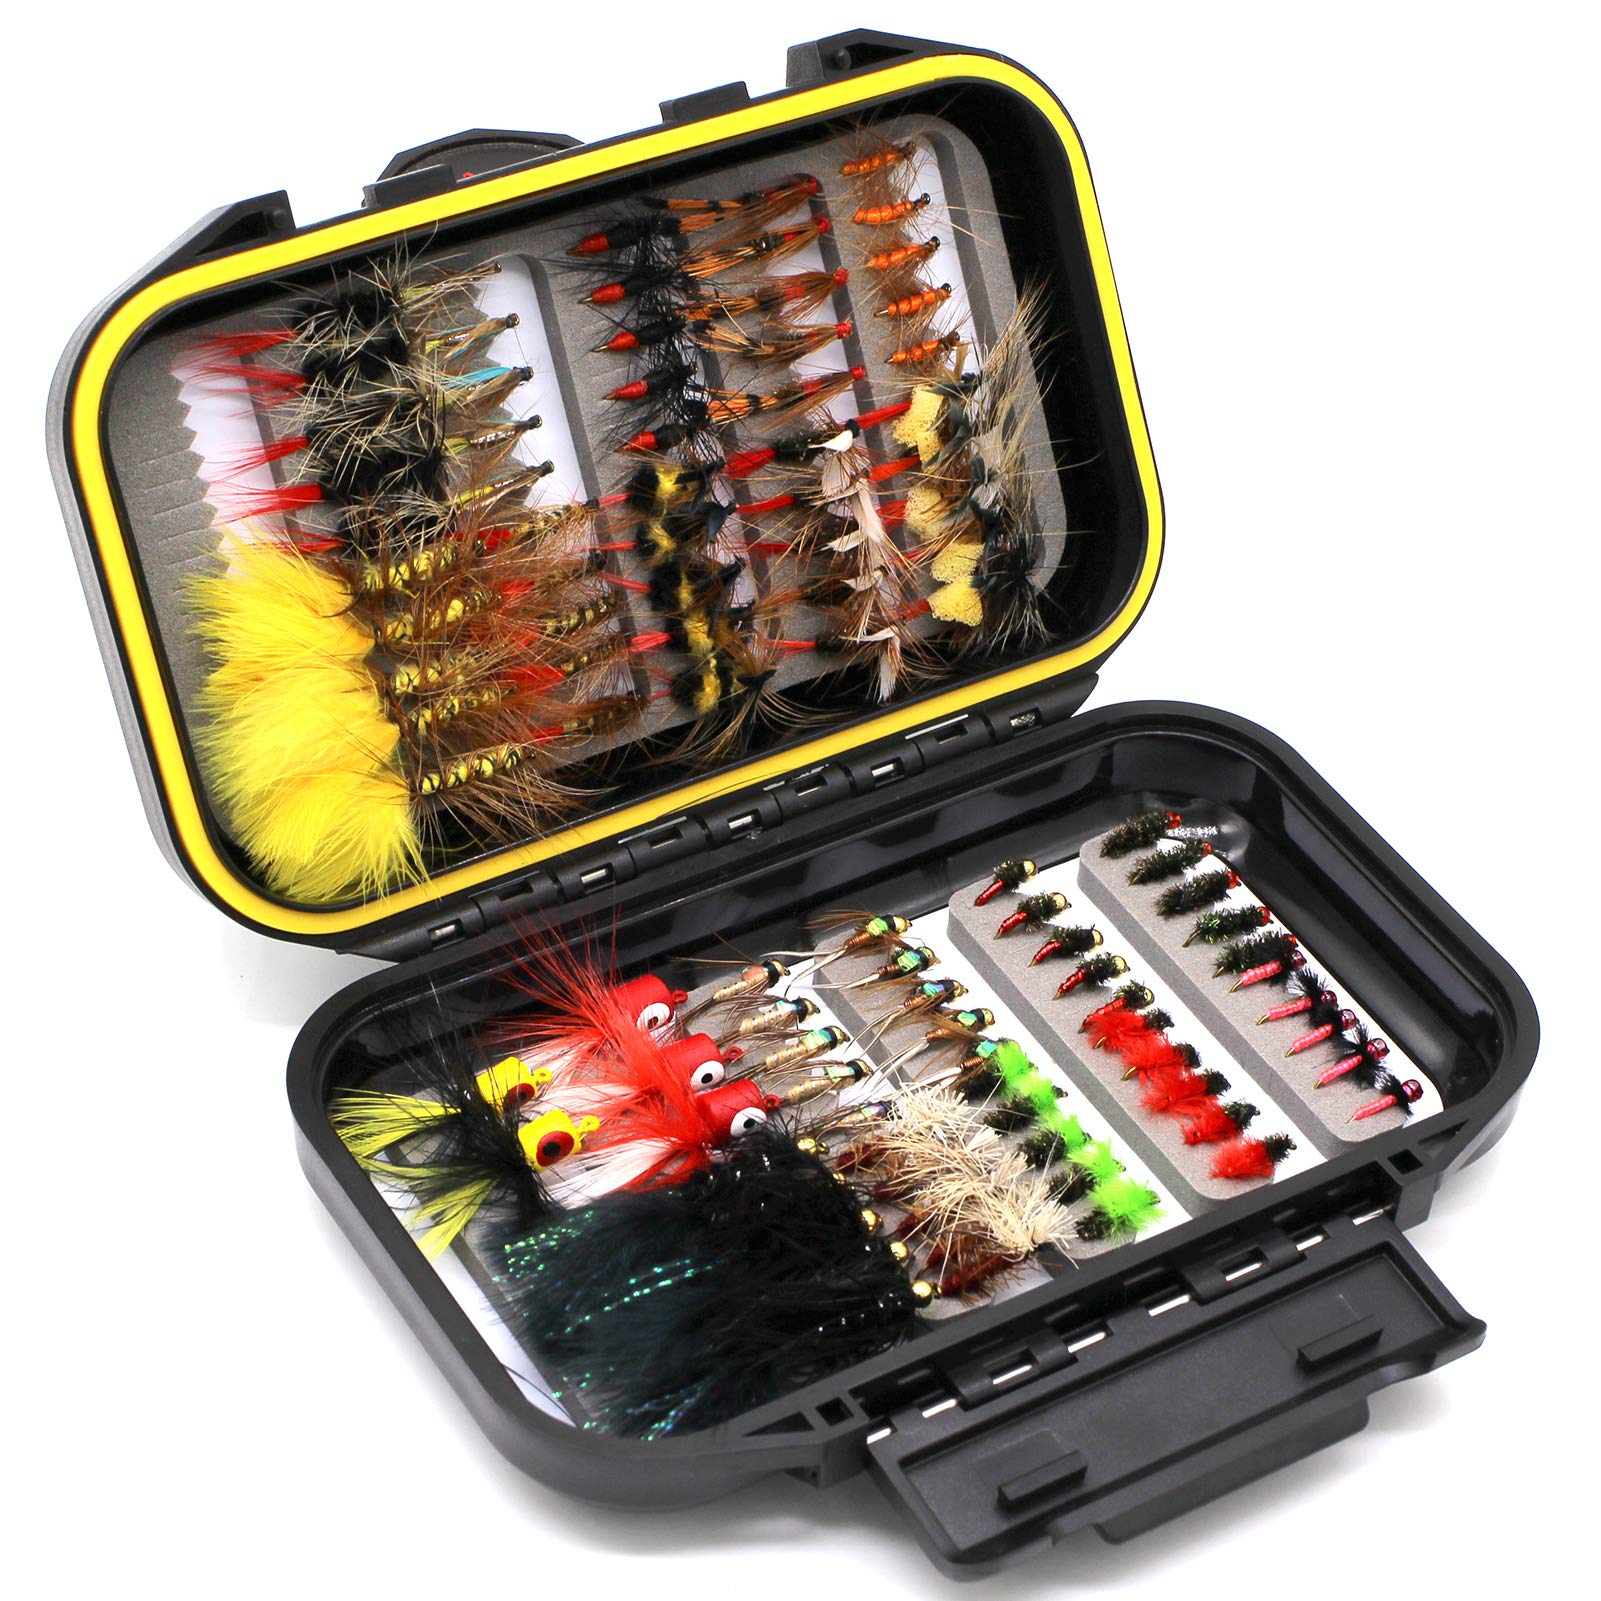 RiverBum Bass Fly Fishing Flies Assortment Kit with Fly Box, Skully  Buggers, Bunny Leech, Poppers, Mr Creepo Flies for Fly Fishing - 10 Piece